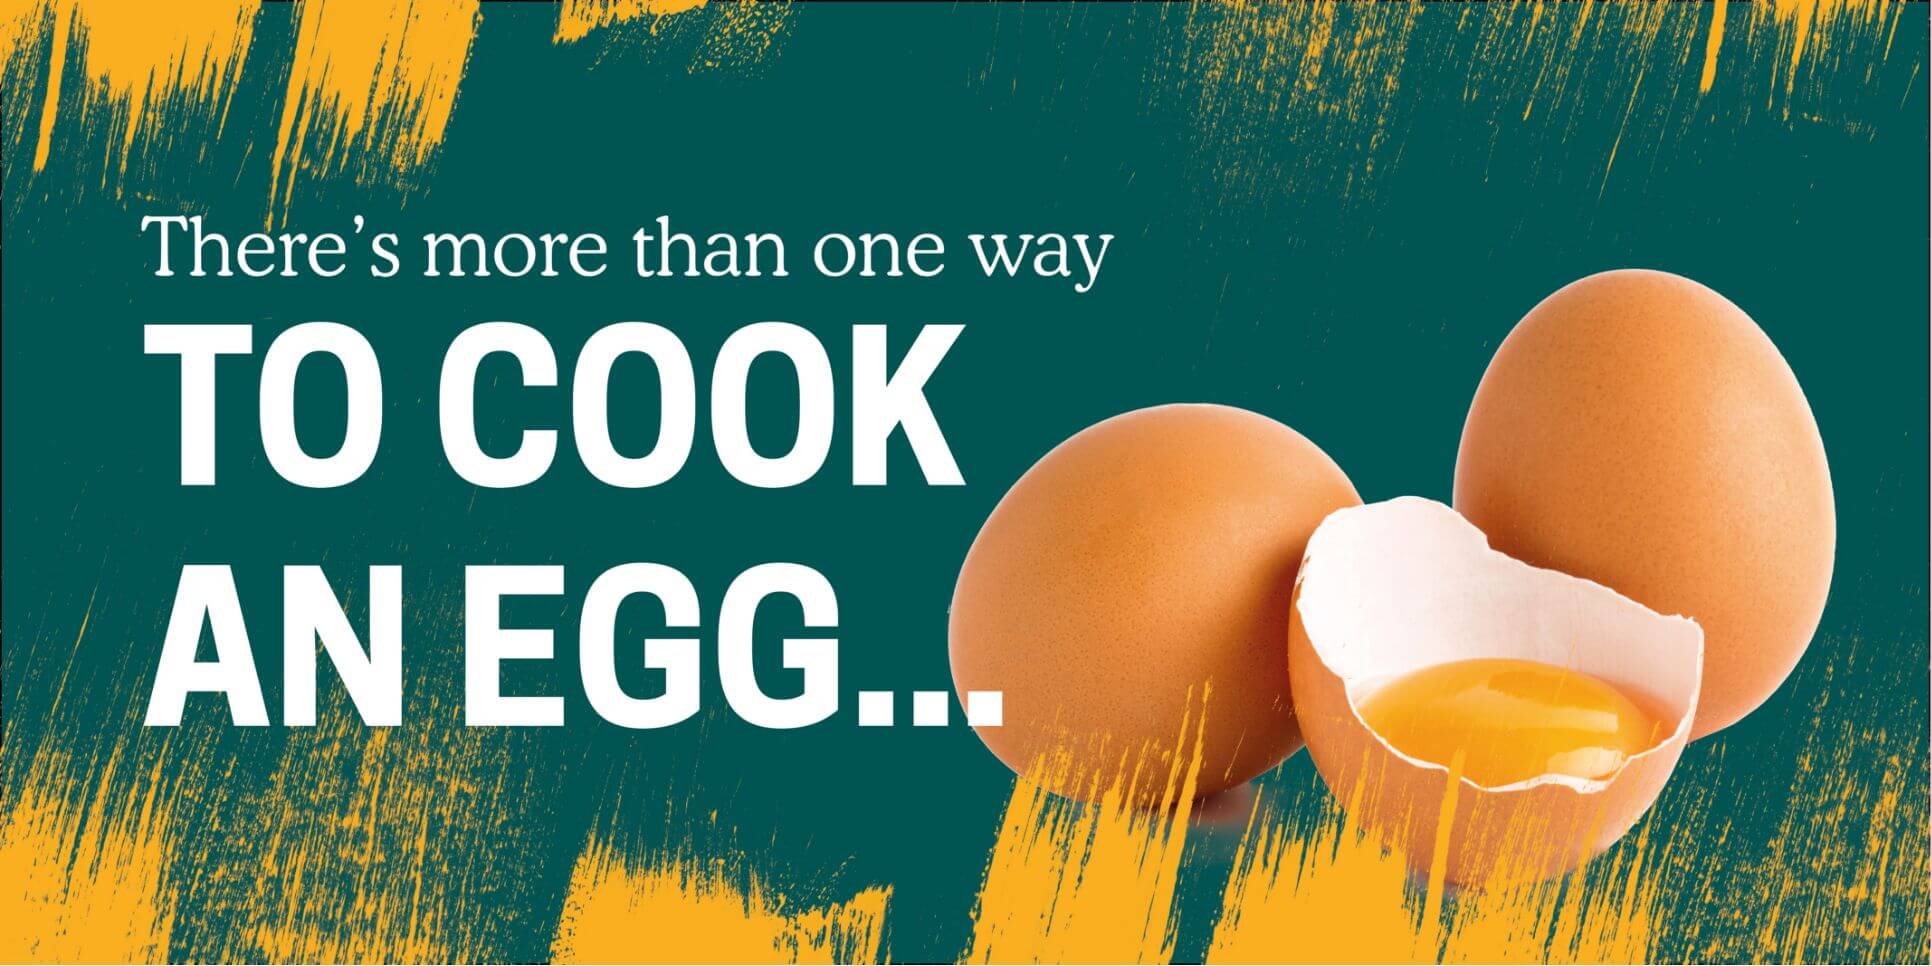 There is more than one way to cook an egg...